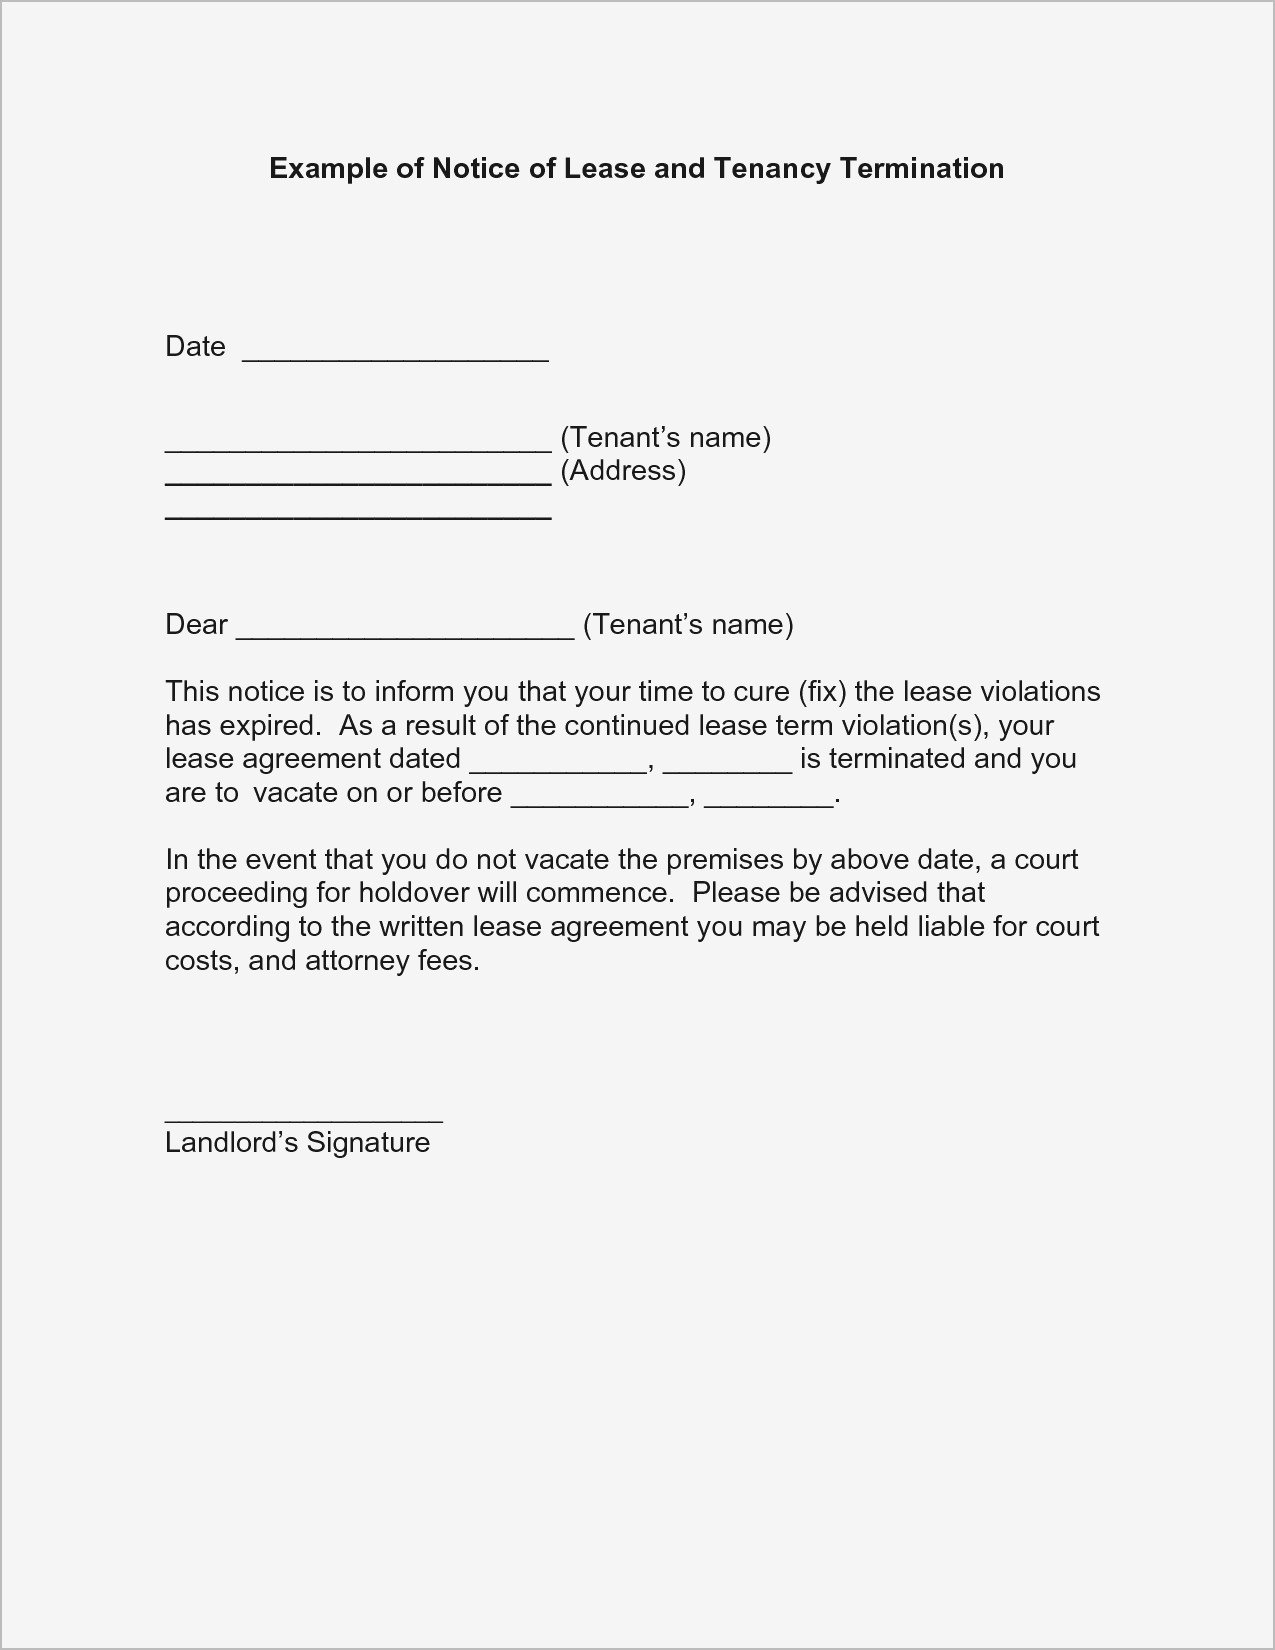 Unauthorized Tenant Letter Template Samples